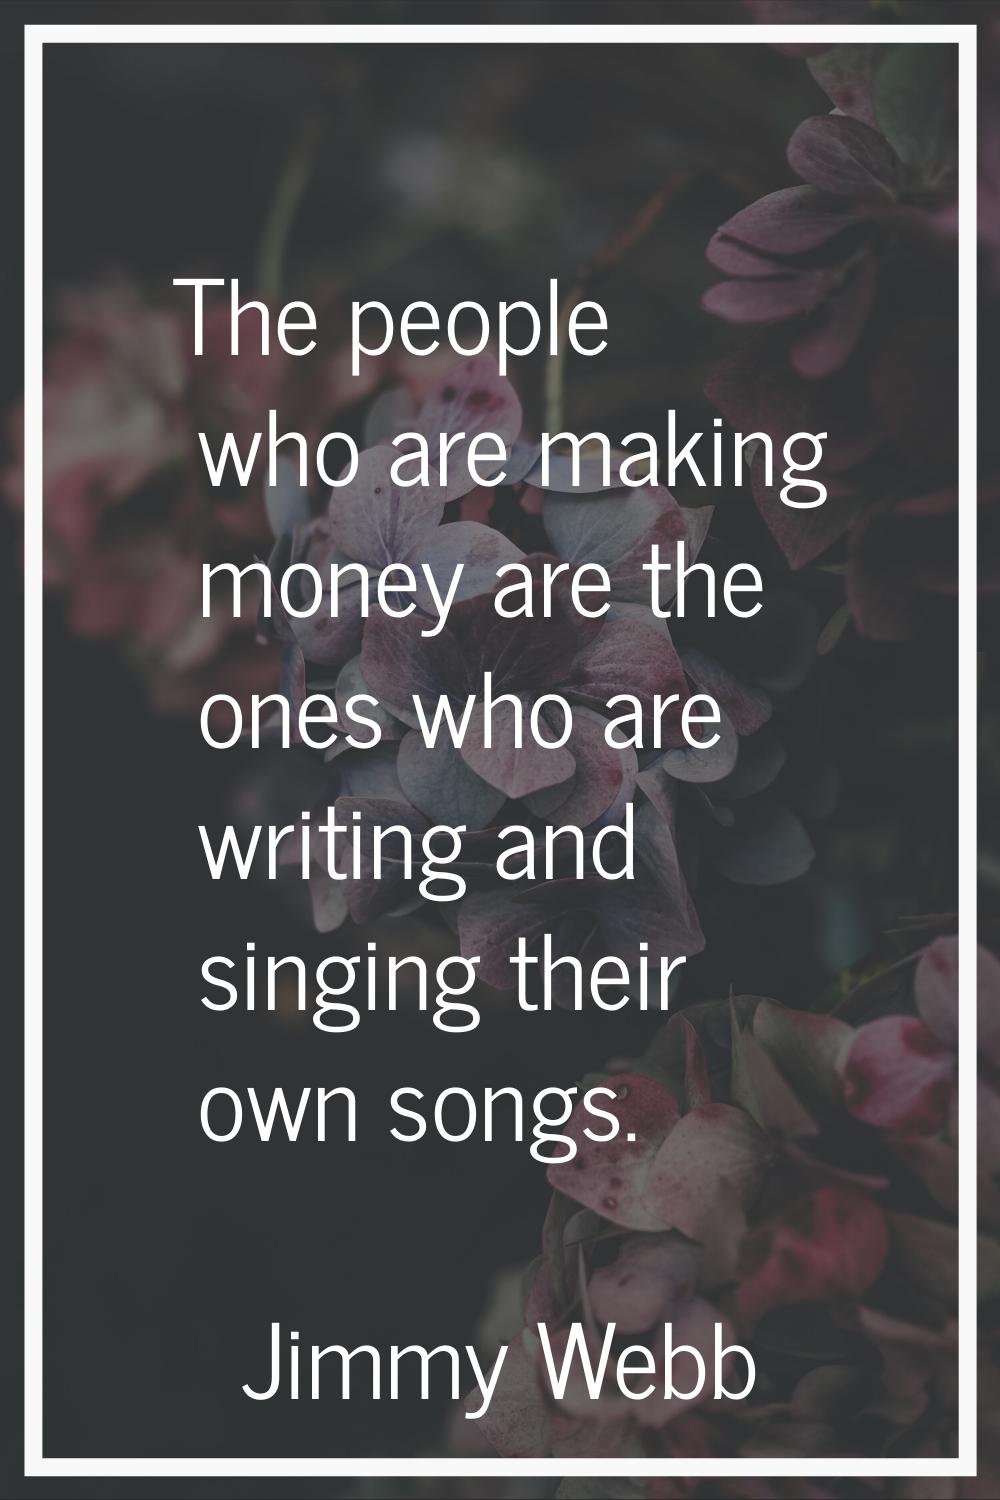 The people who are making money are the ones who are writing and singing their own songs.